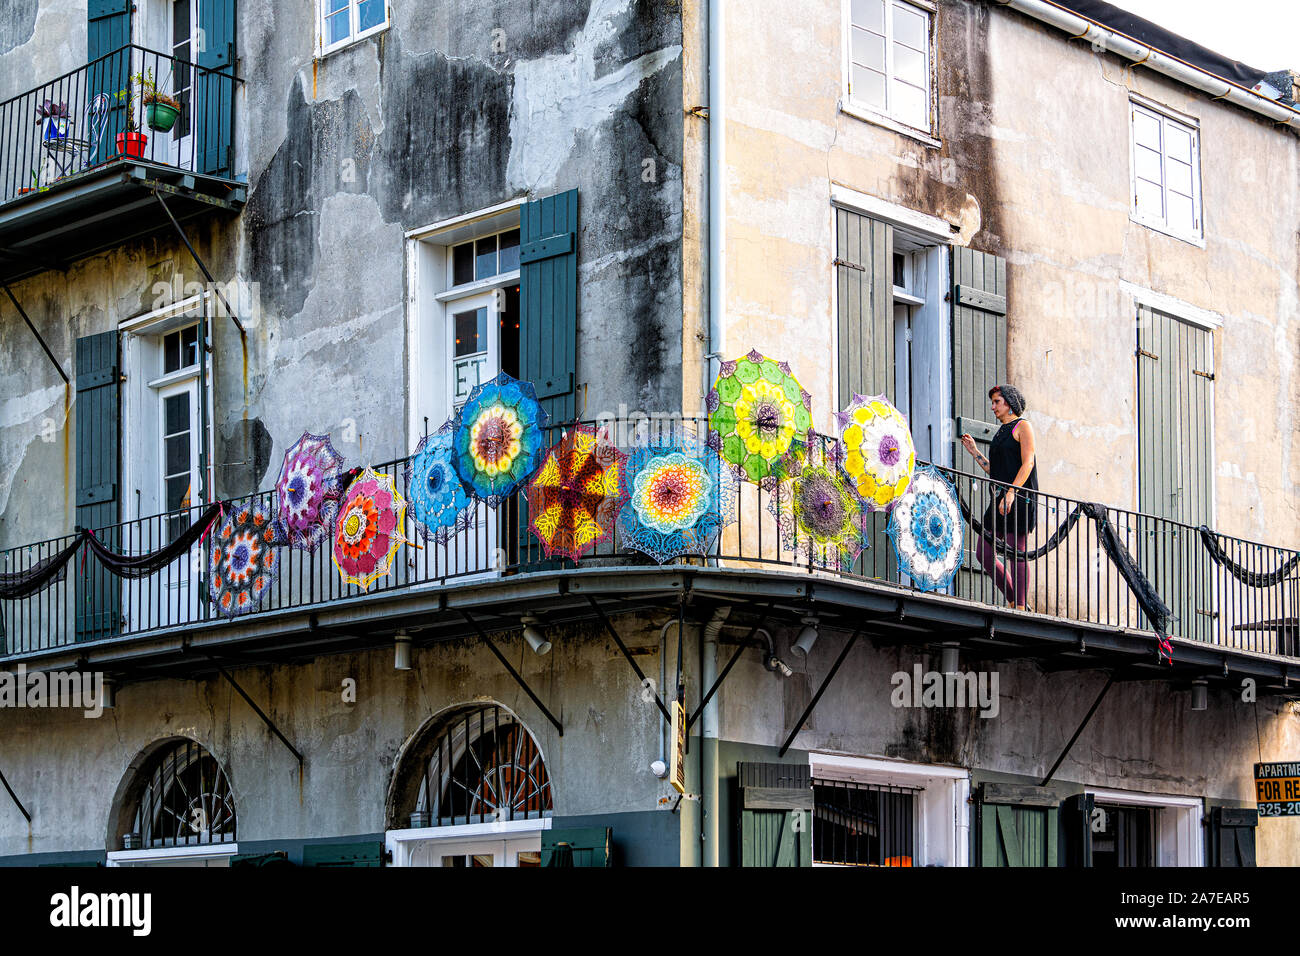 New Orleans, USA - April 23, 2018: Antique store with colorful design vintage umbrellas on balcony street in Louisiana city Stock Photo